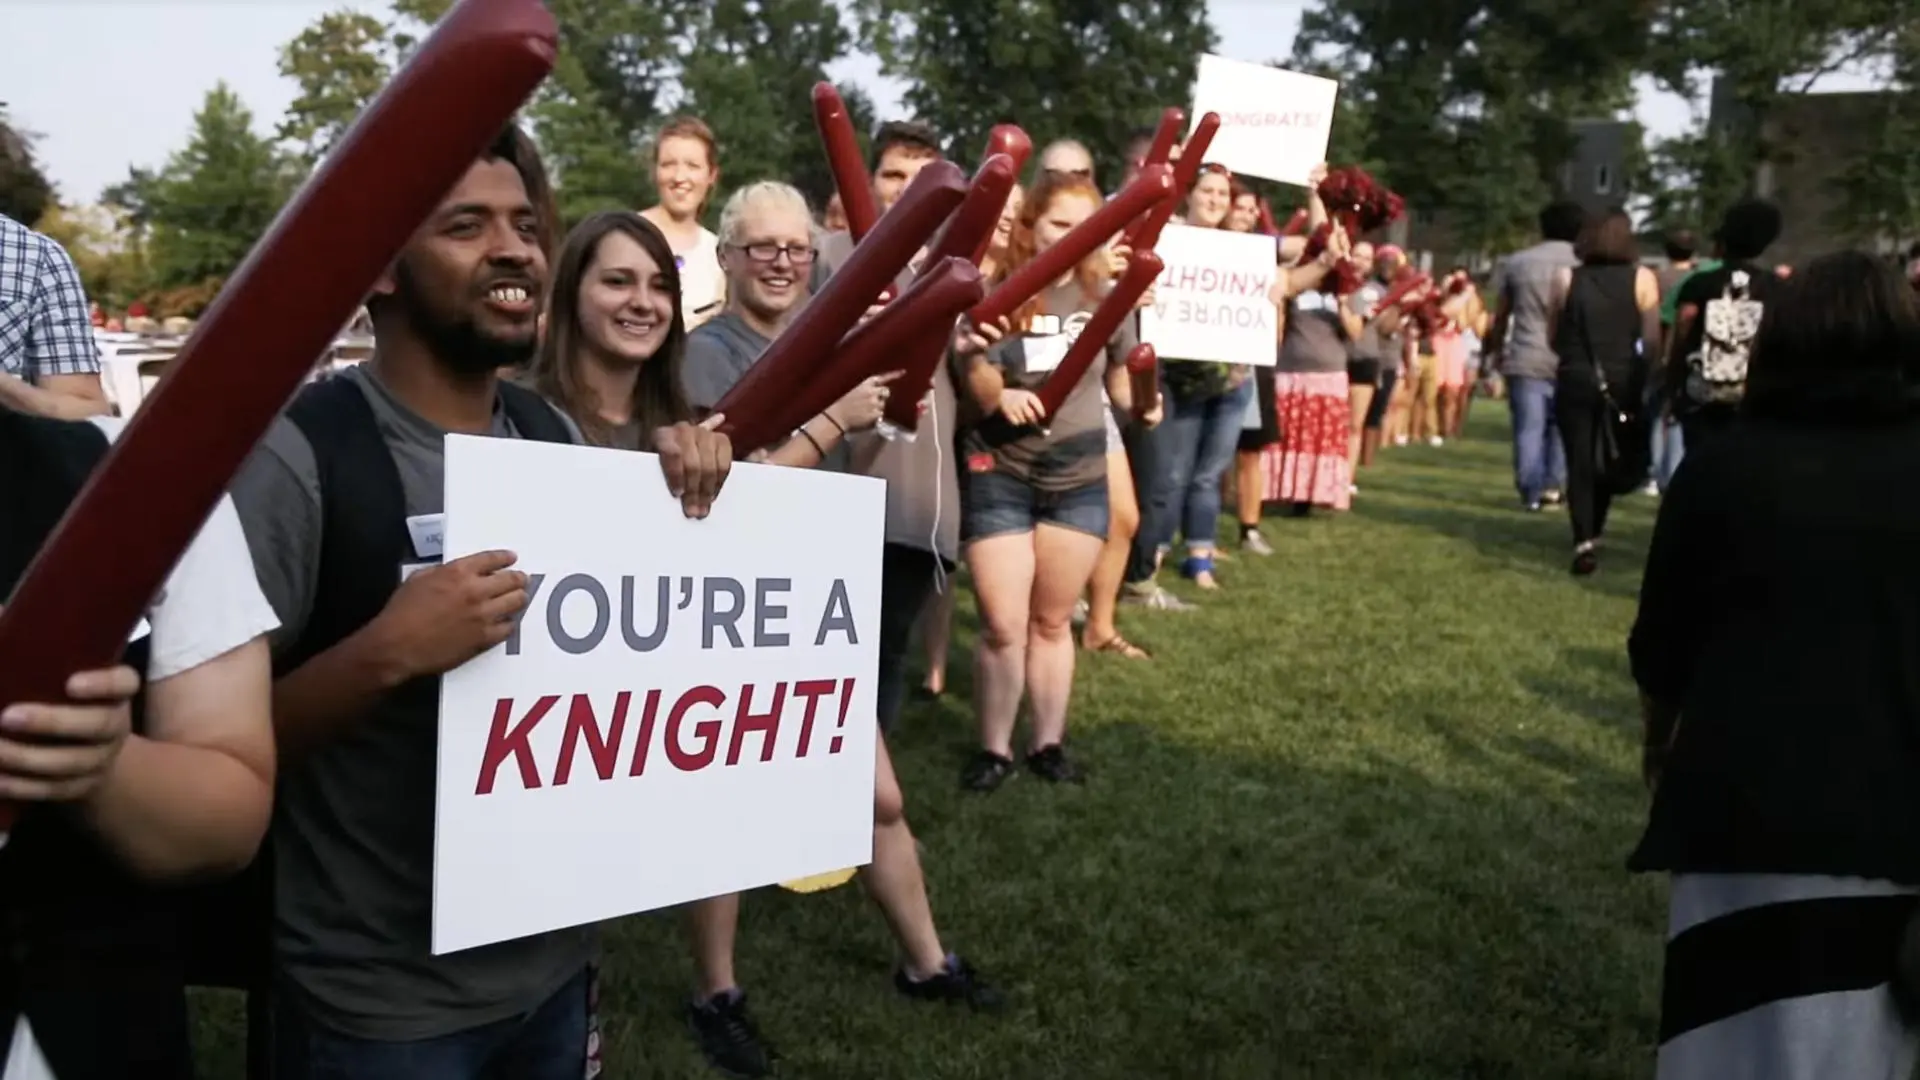 Transfer students show their Knight spirit at an outdoor event by holding white posters that read 